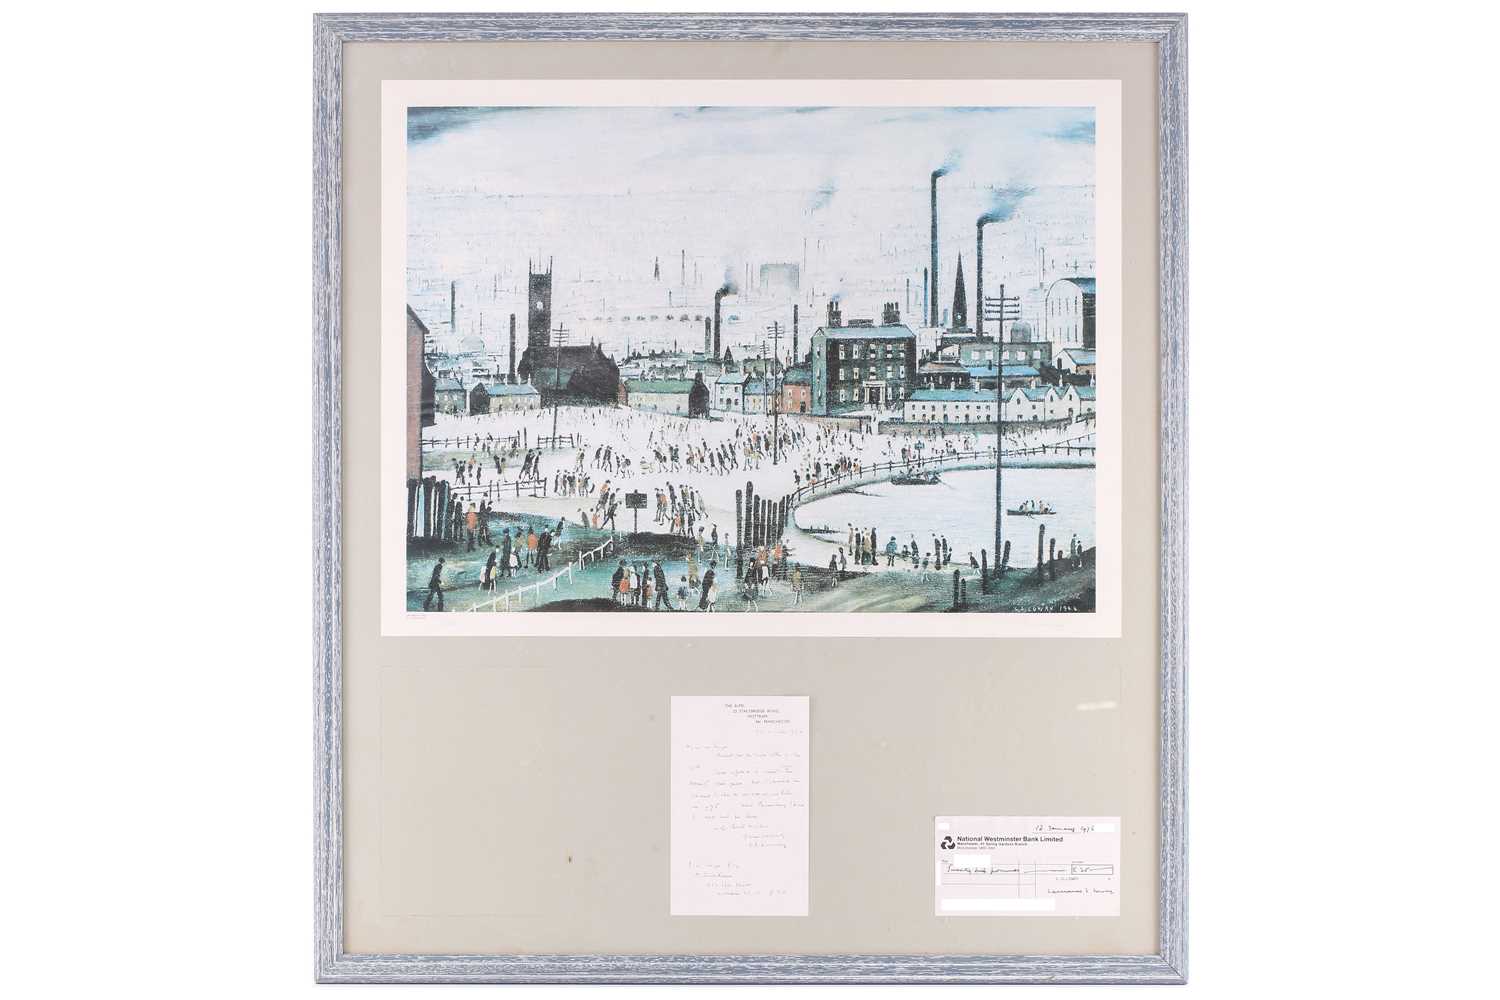 Laurence Stephen Lowry RA (1887-1976) British, 'An Industrial Town', limited edition print signed in